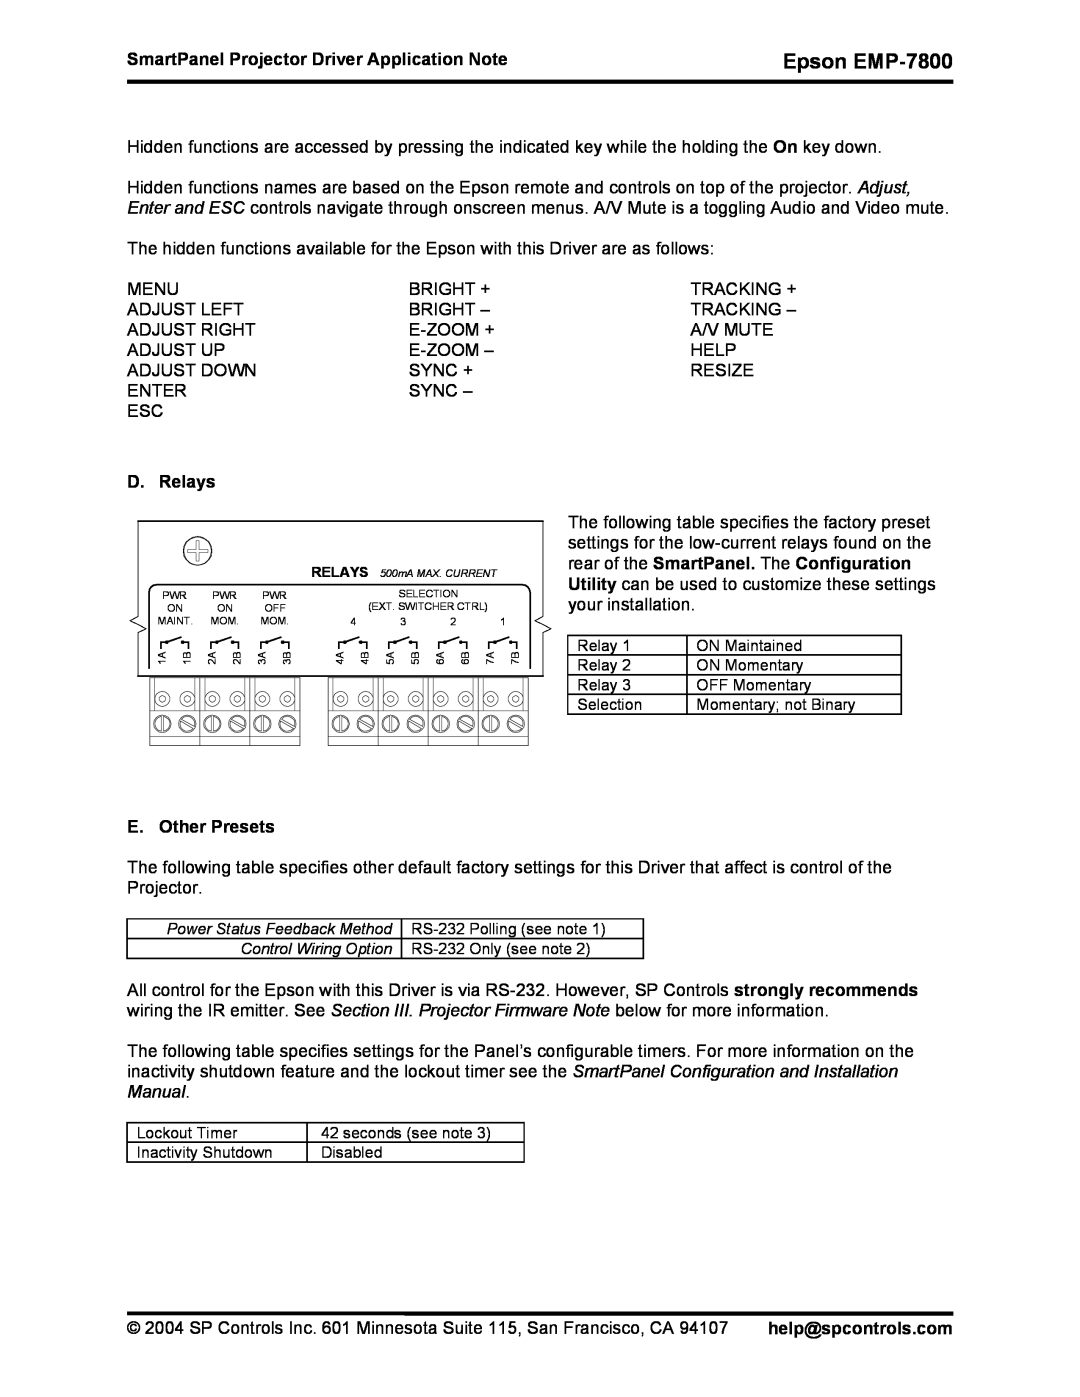 Epson DR-EPS19 quick start D. Relays, E. Other Presets, Epson EMP-7800, SmartPanel Projector Driver Application Note 